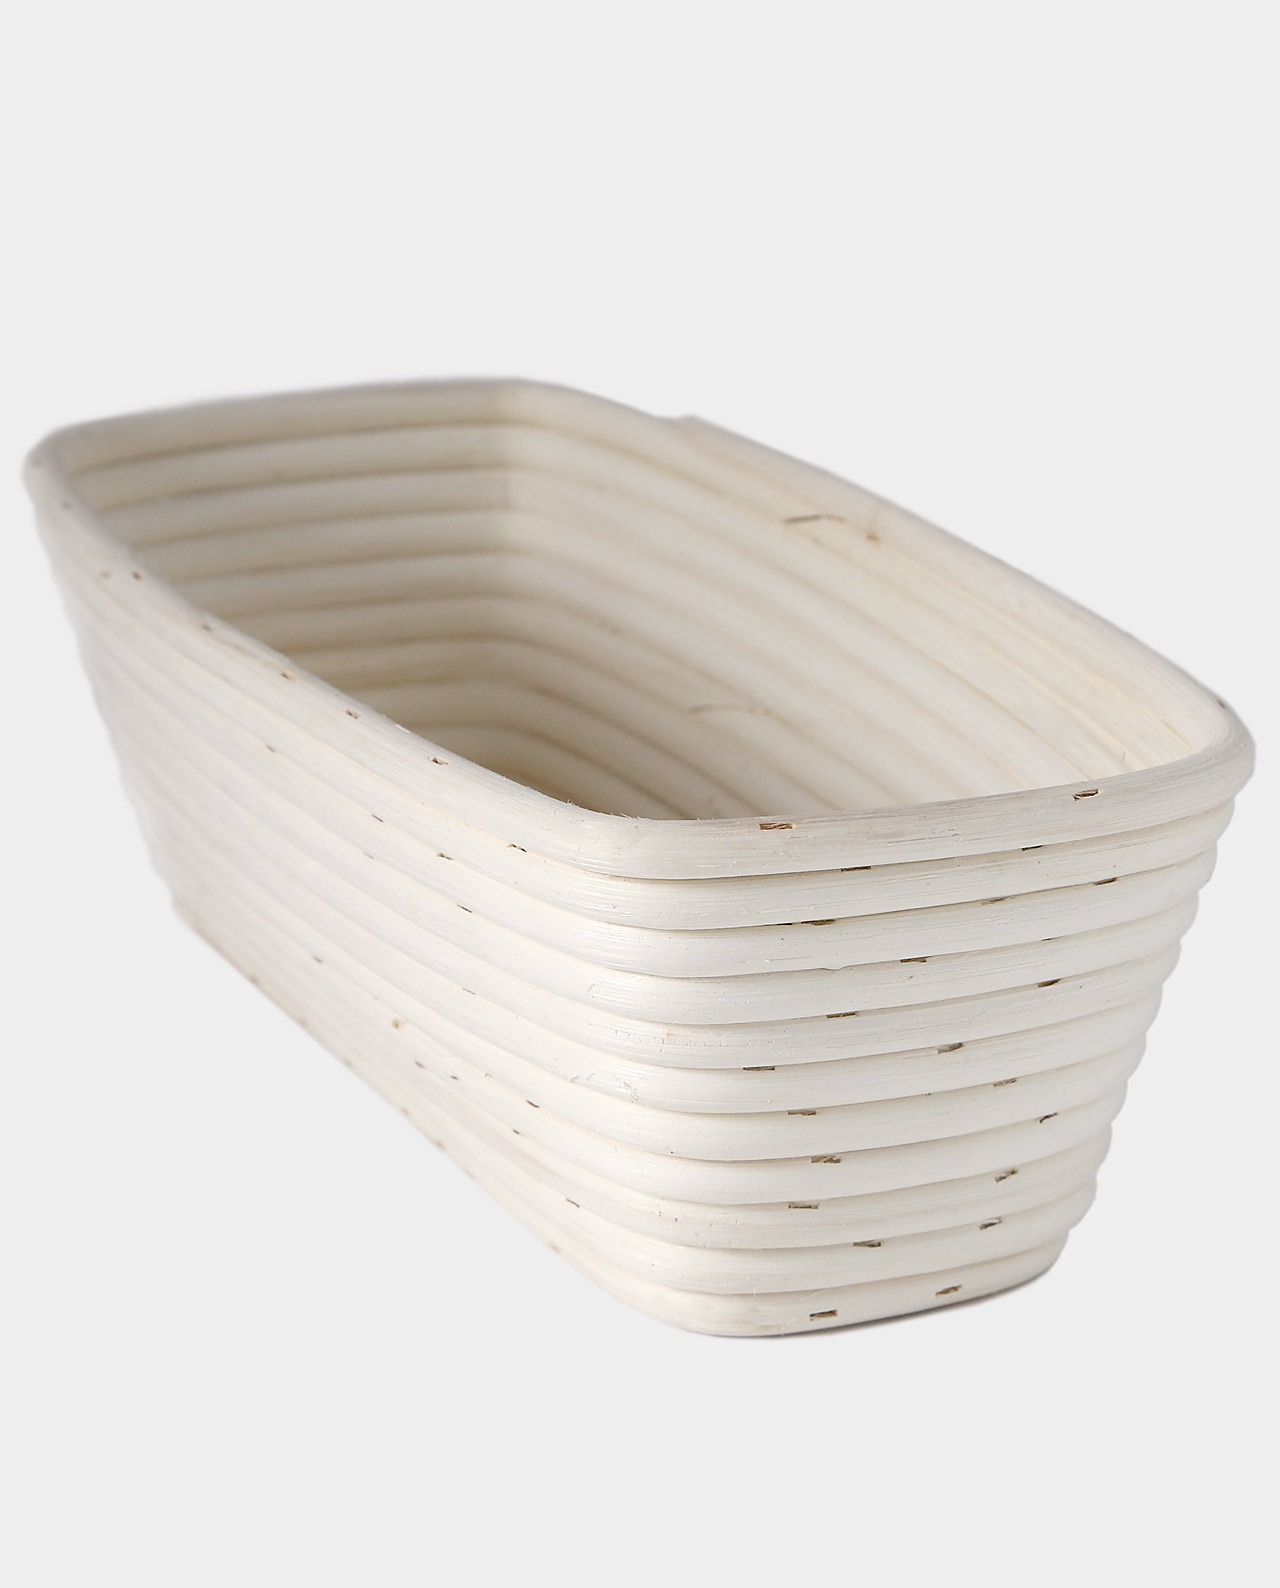 EudoUS 4Pcs Oval Banneton Brotform Bread Baskets with Linen Liners hold 600g Dough Proofing Proving Natural Rattan 